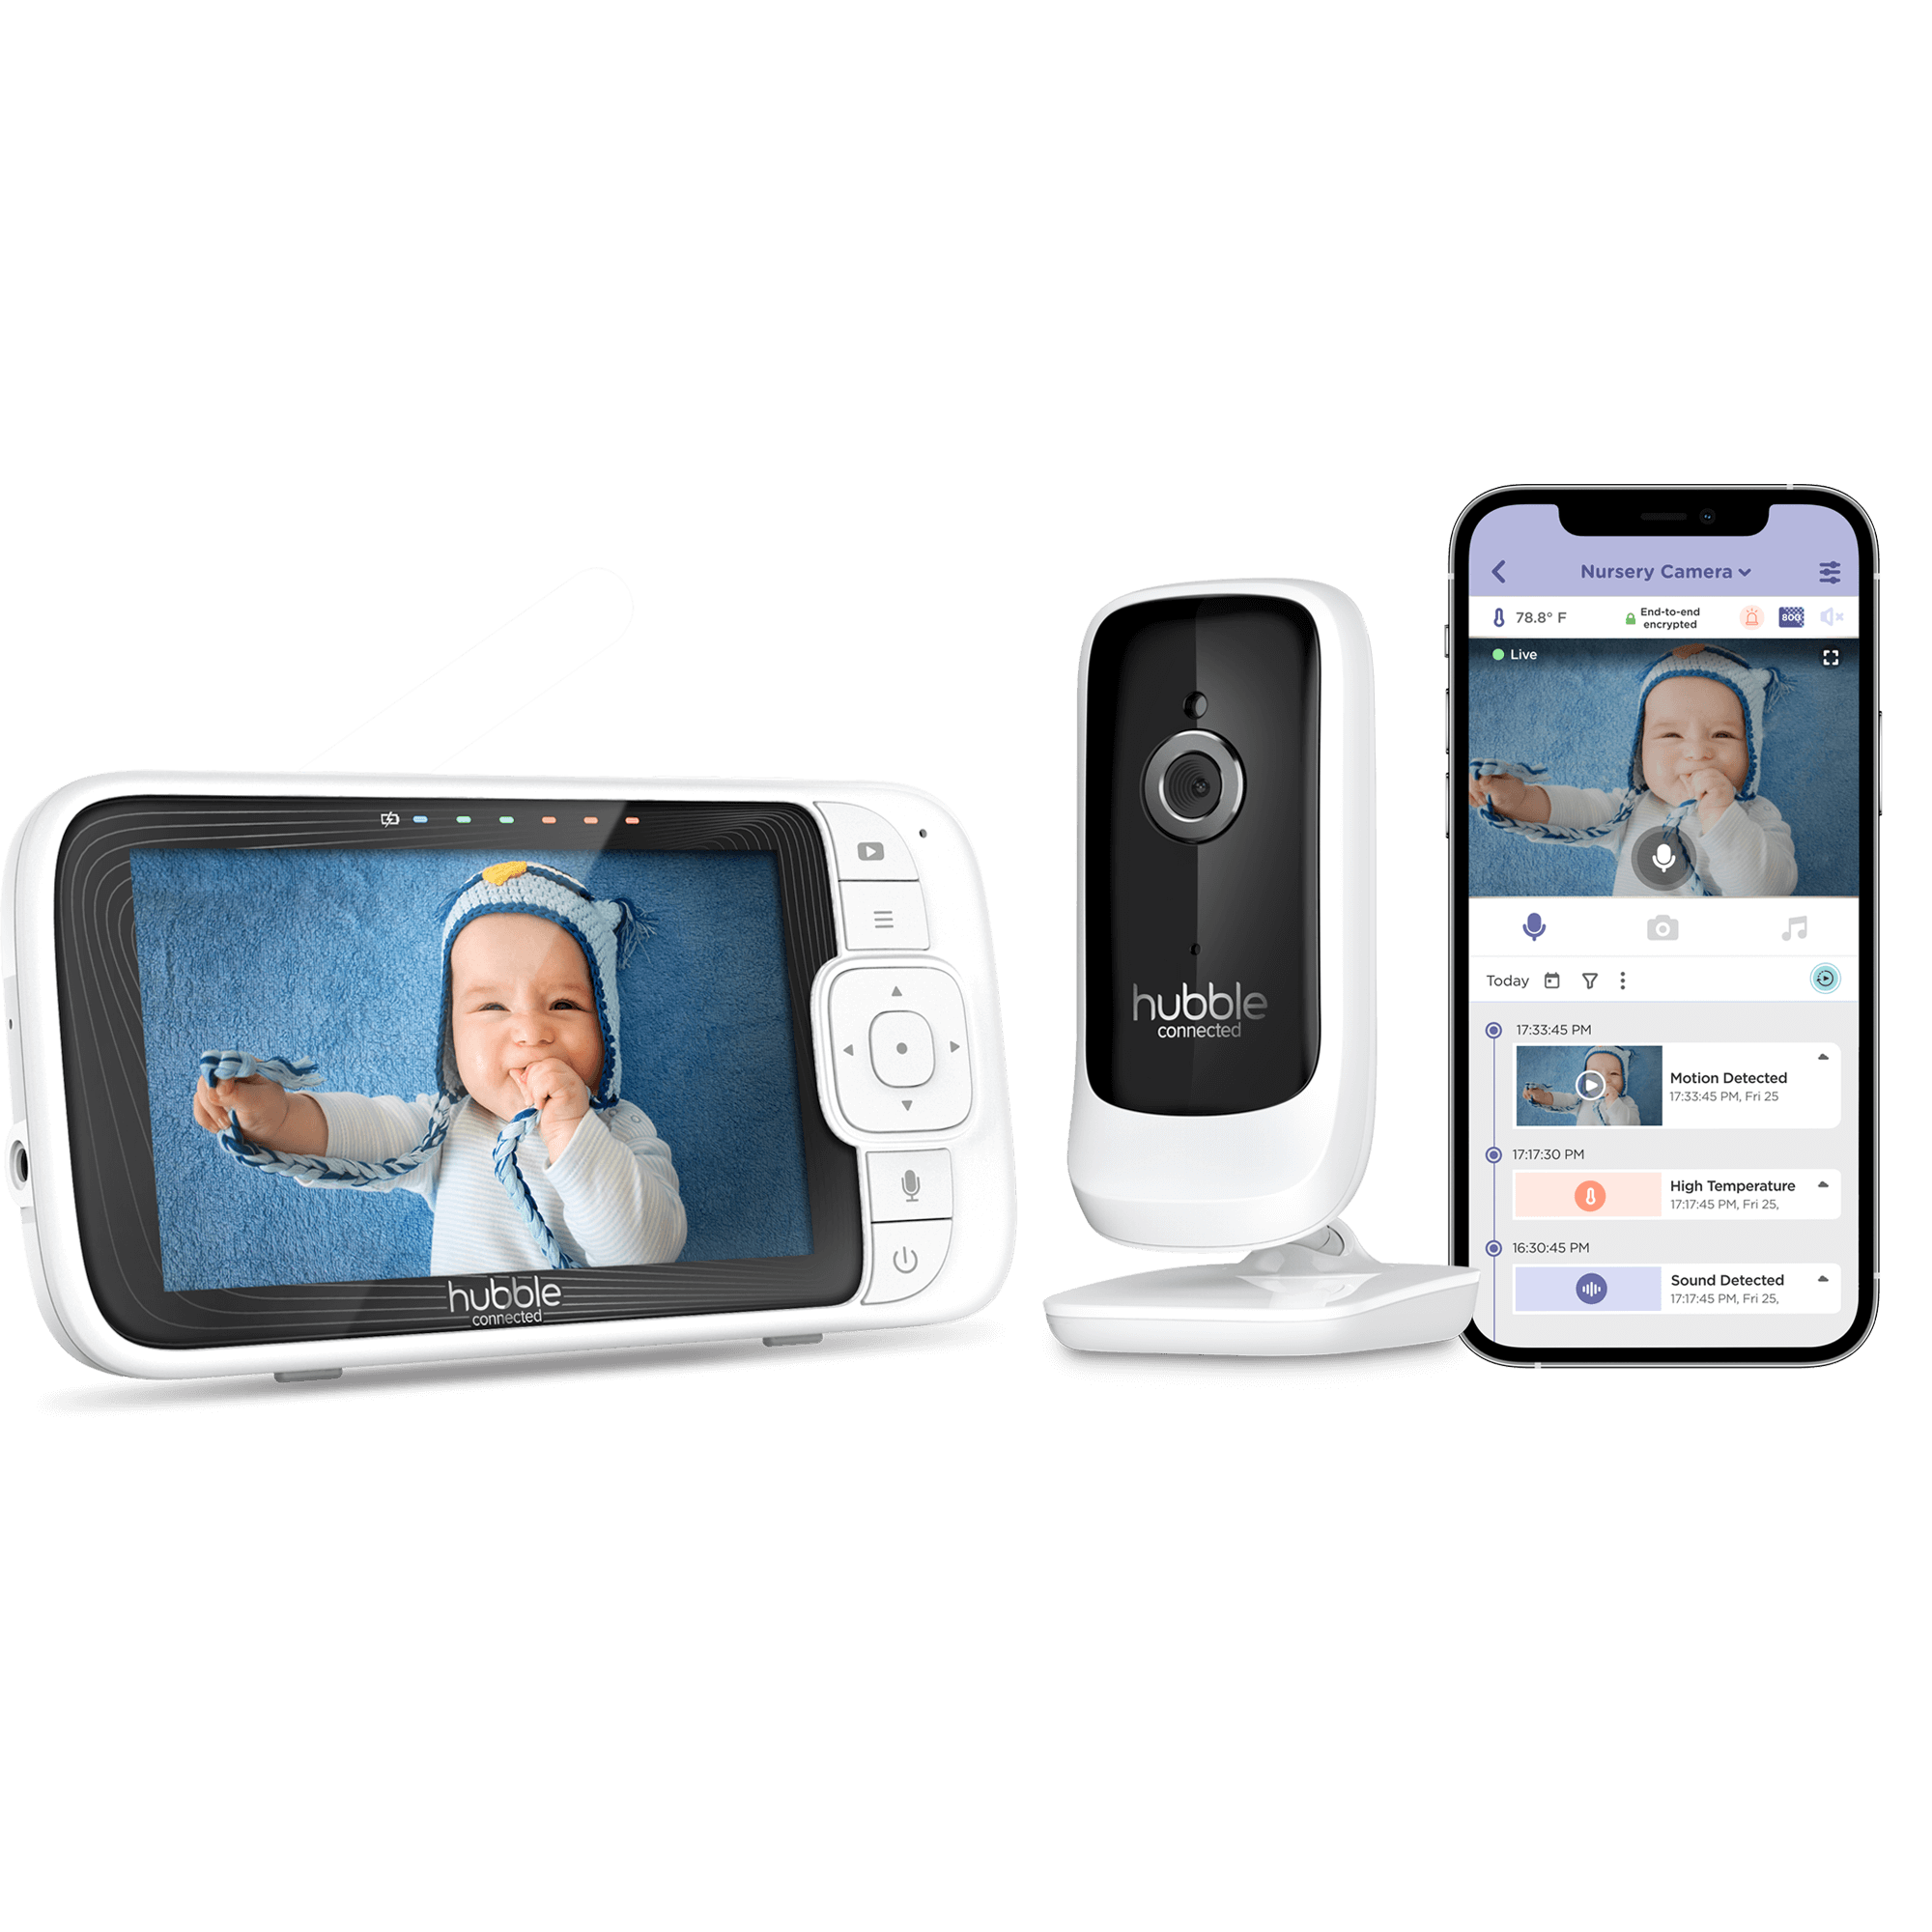 Tigge Regeringsforordning Lee Buy Smart Baby Monitors Online | Video Monitoring For Babies - Hubble  Connected